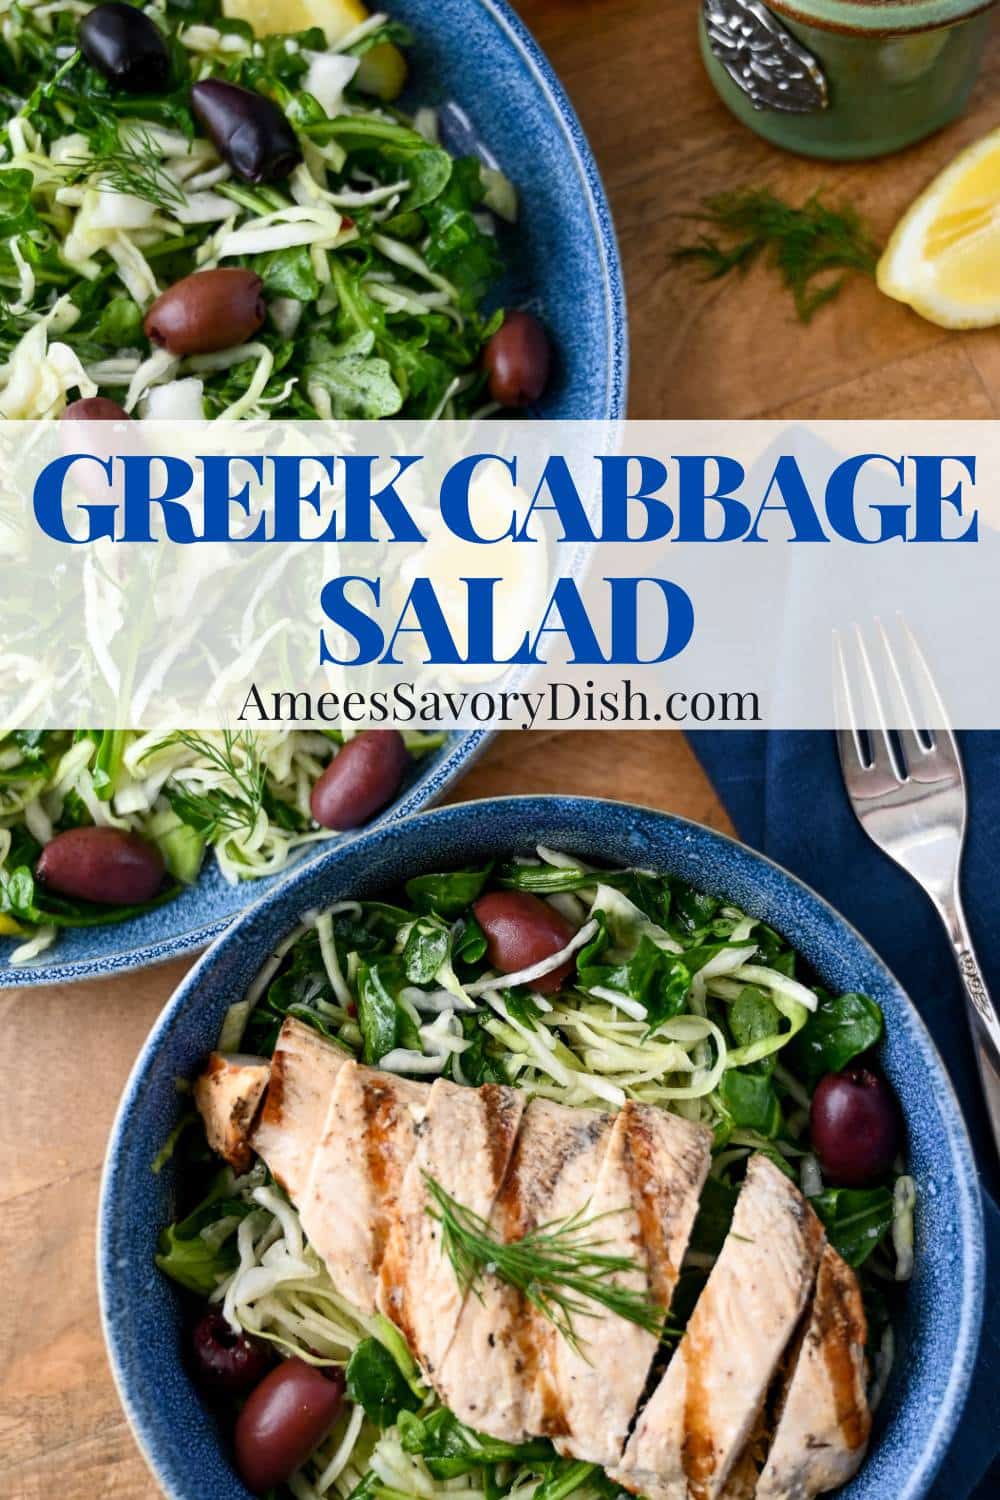 This light and fresh Greek cabbage salad can be served as a simple side dish or top it with grilled chicken for a high-protein, low-carb meal.  via @Ameessavorydish